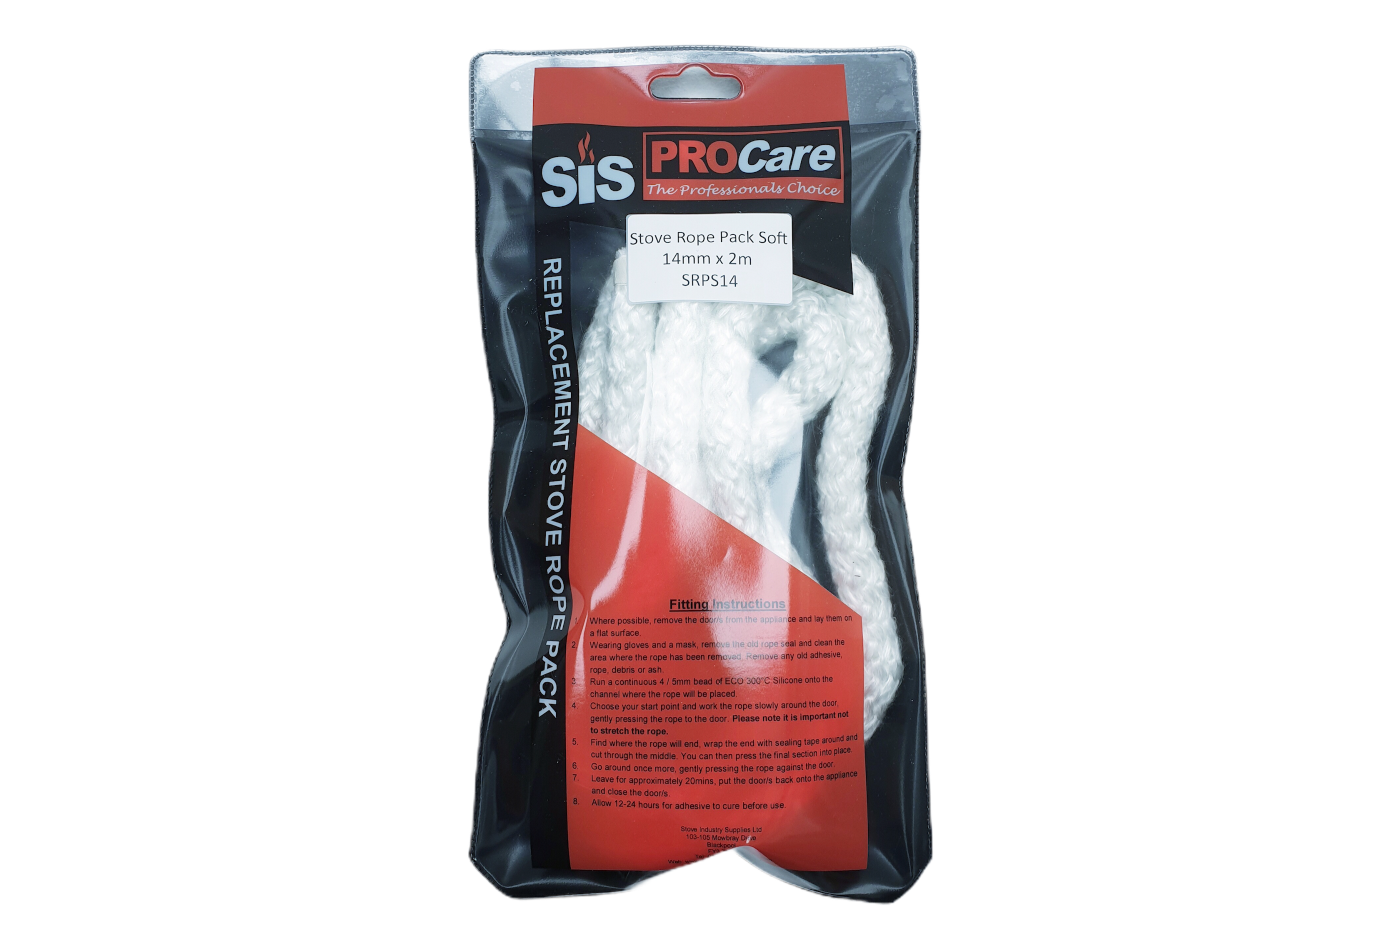 SiS Procare White 14 milimetre x 2 metre Soft Stove Rope Pack - product code SRPS14